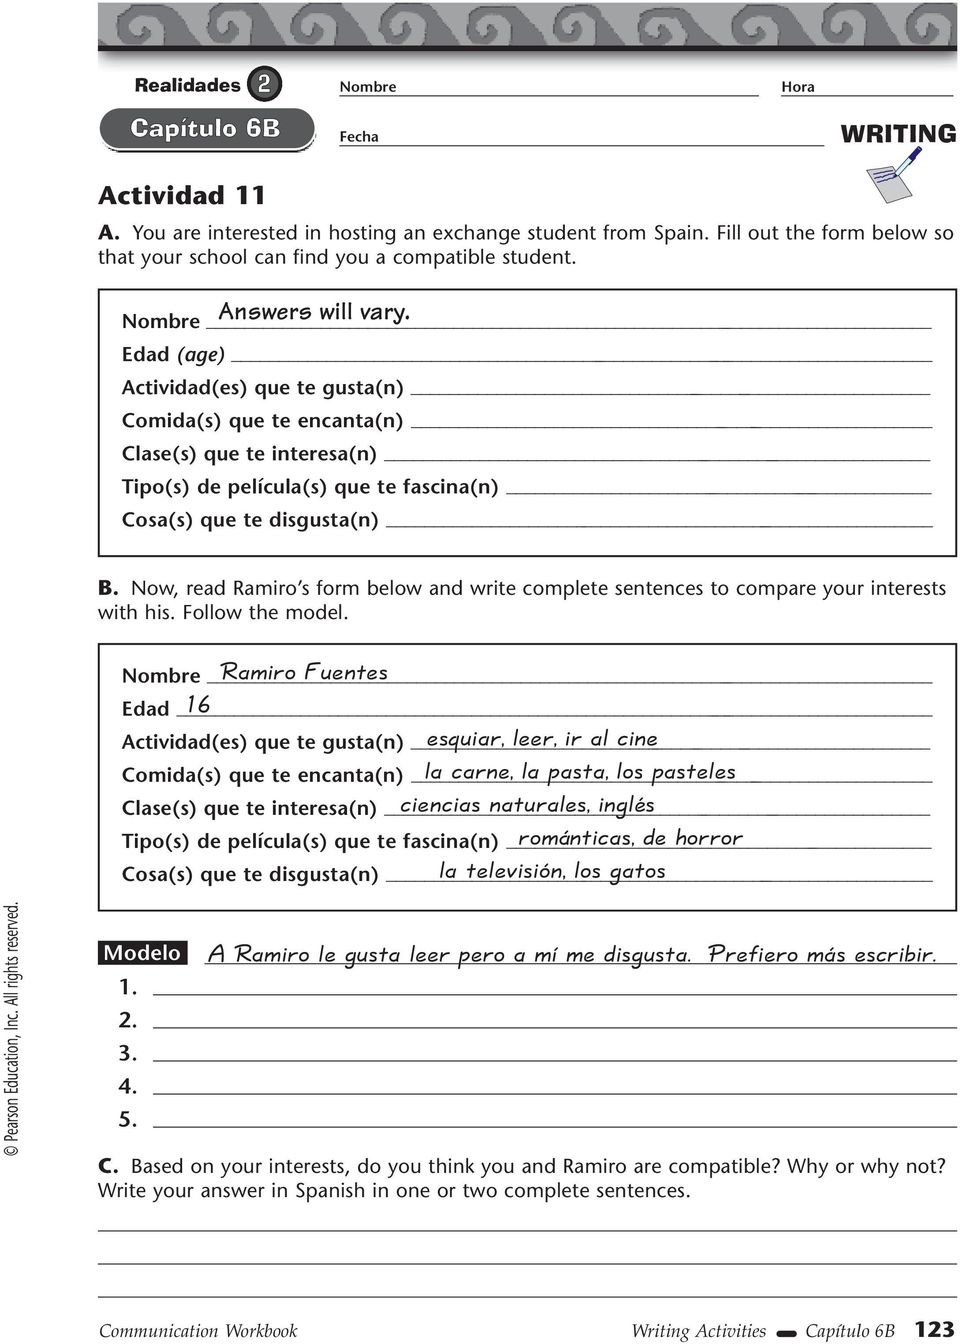 Now, read Ramiro s form below and write complete sentences to compare your interests with his. Follow the model.